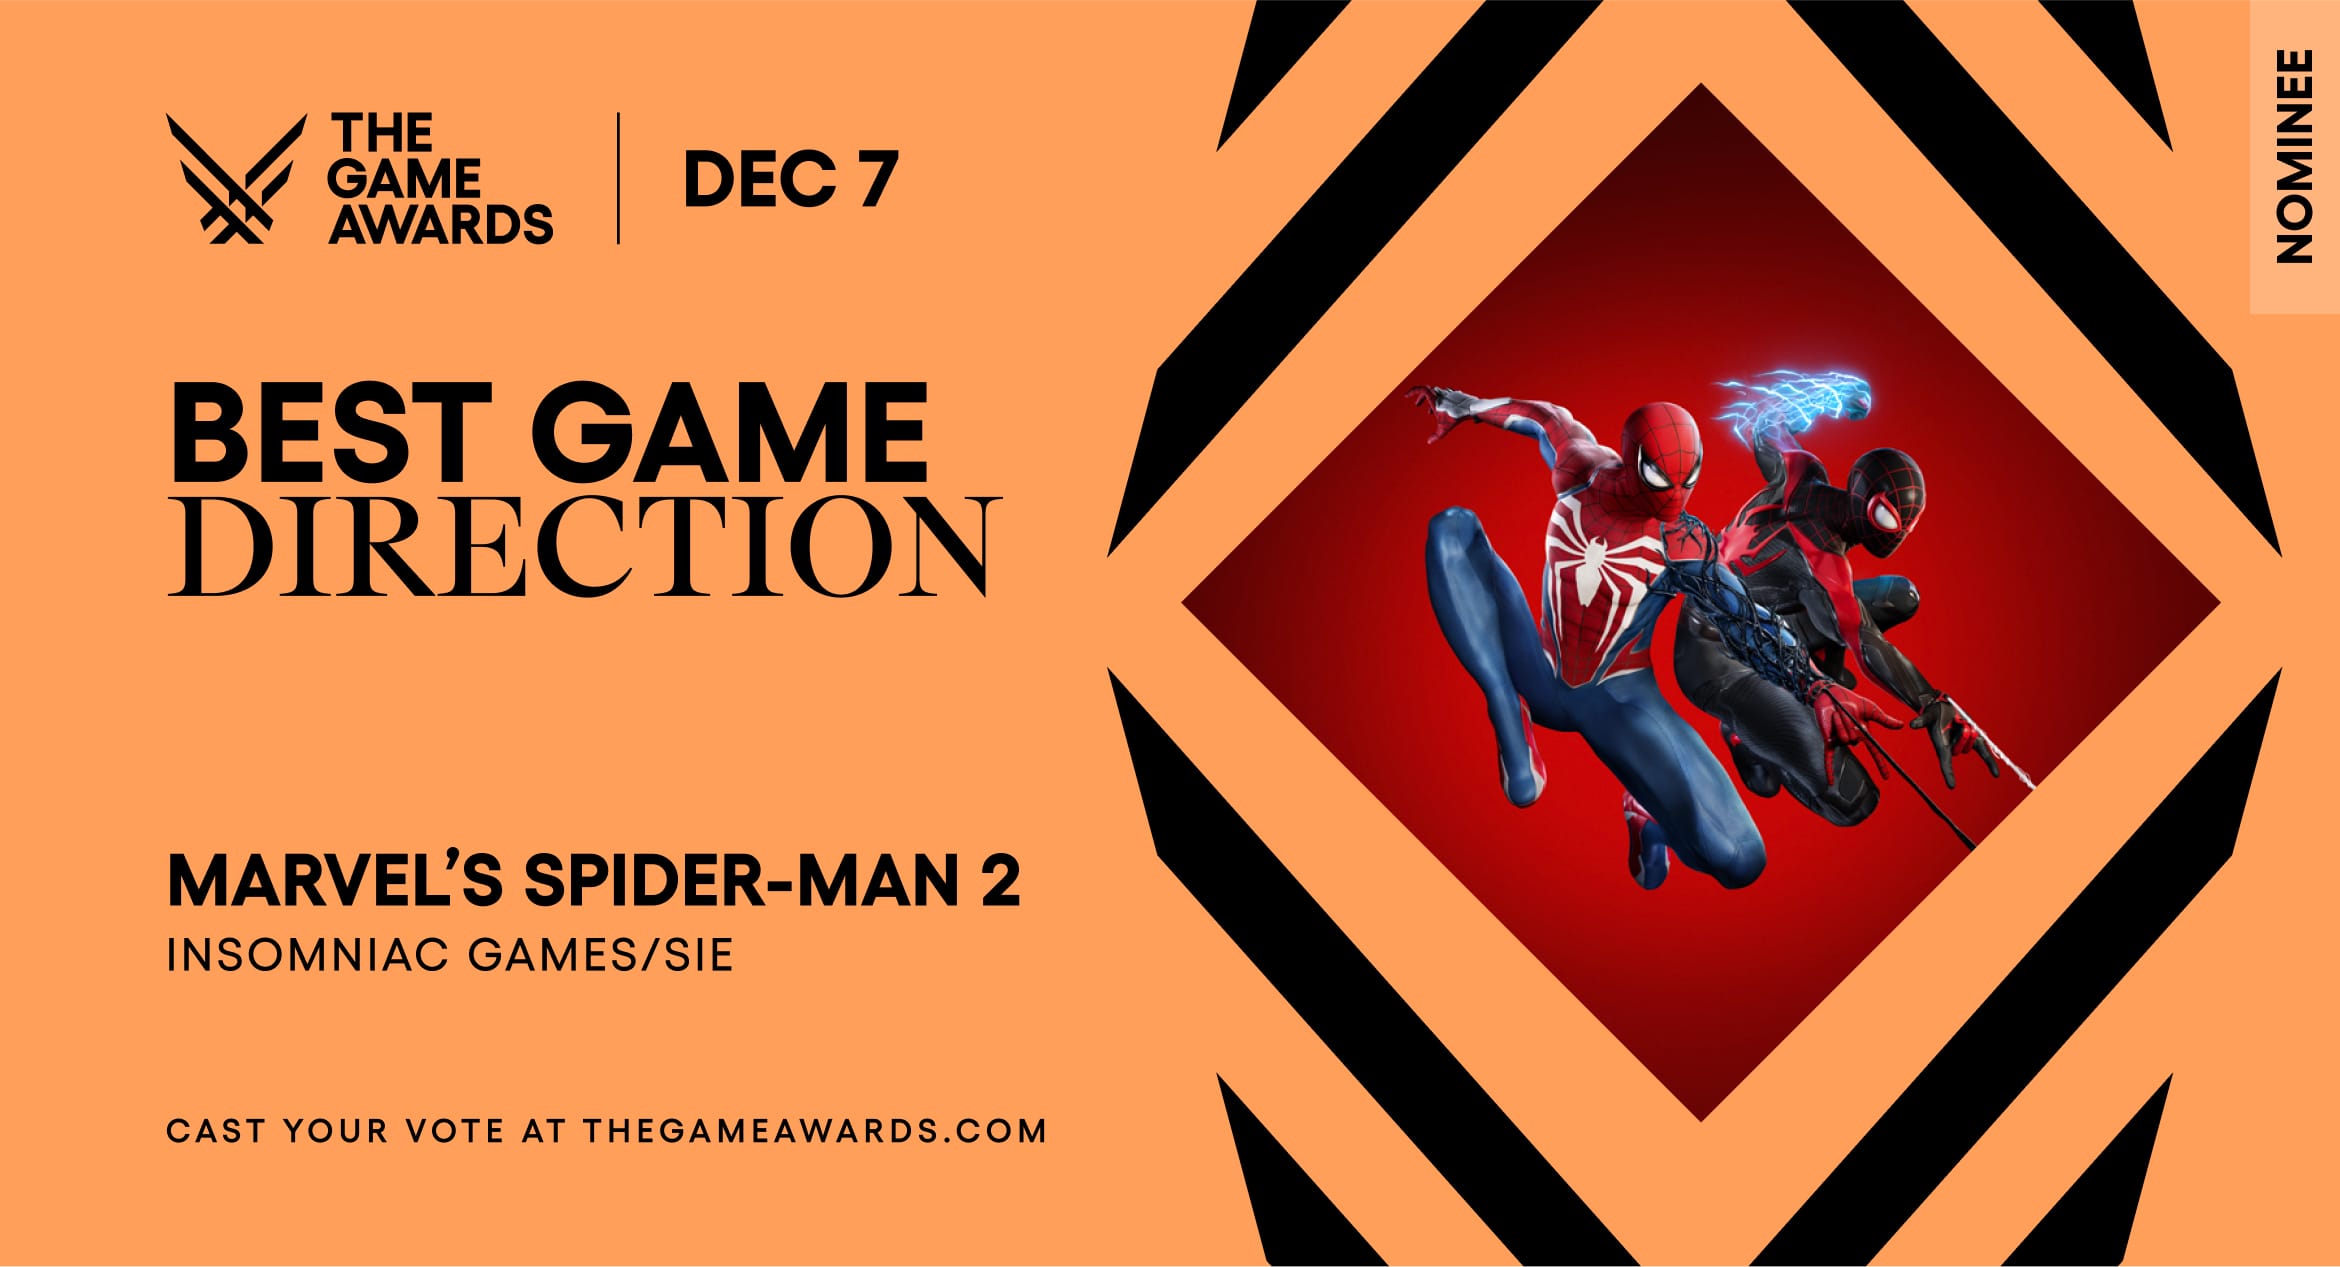 Game of the Year 2018 nominees: 6 games worth playing